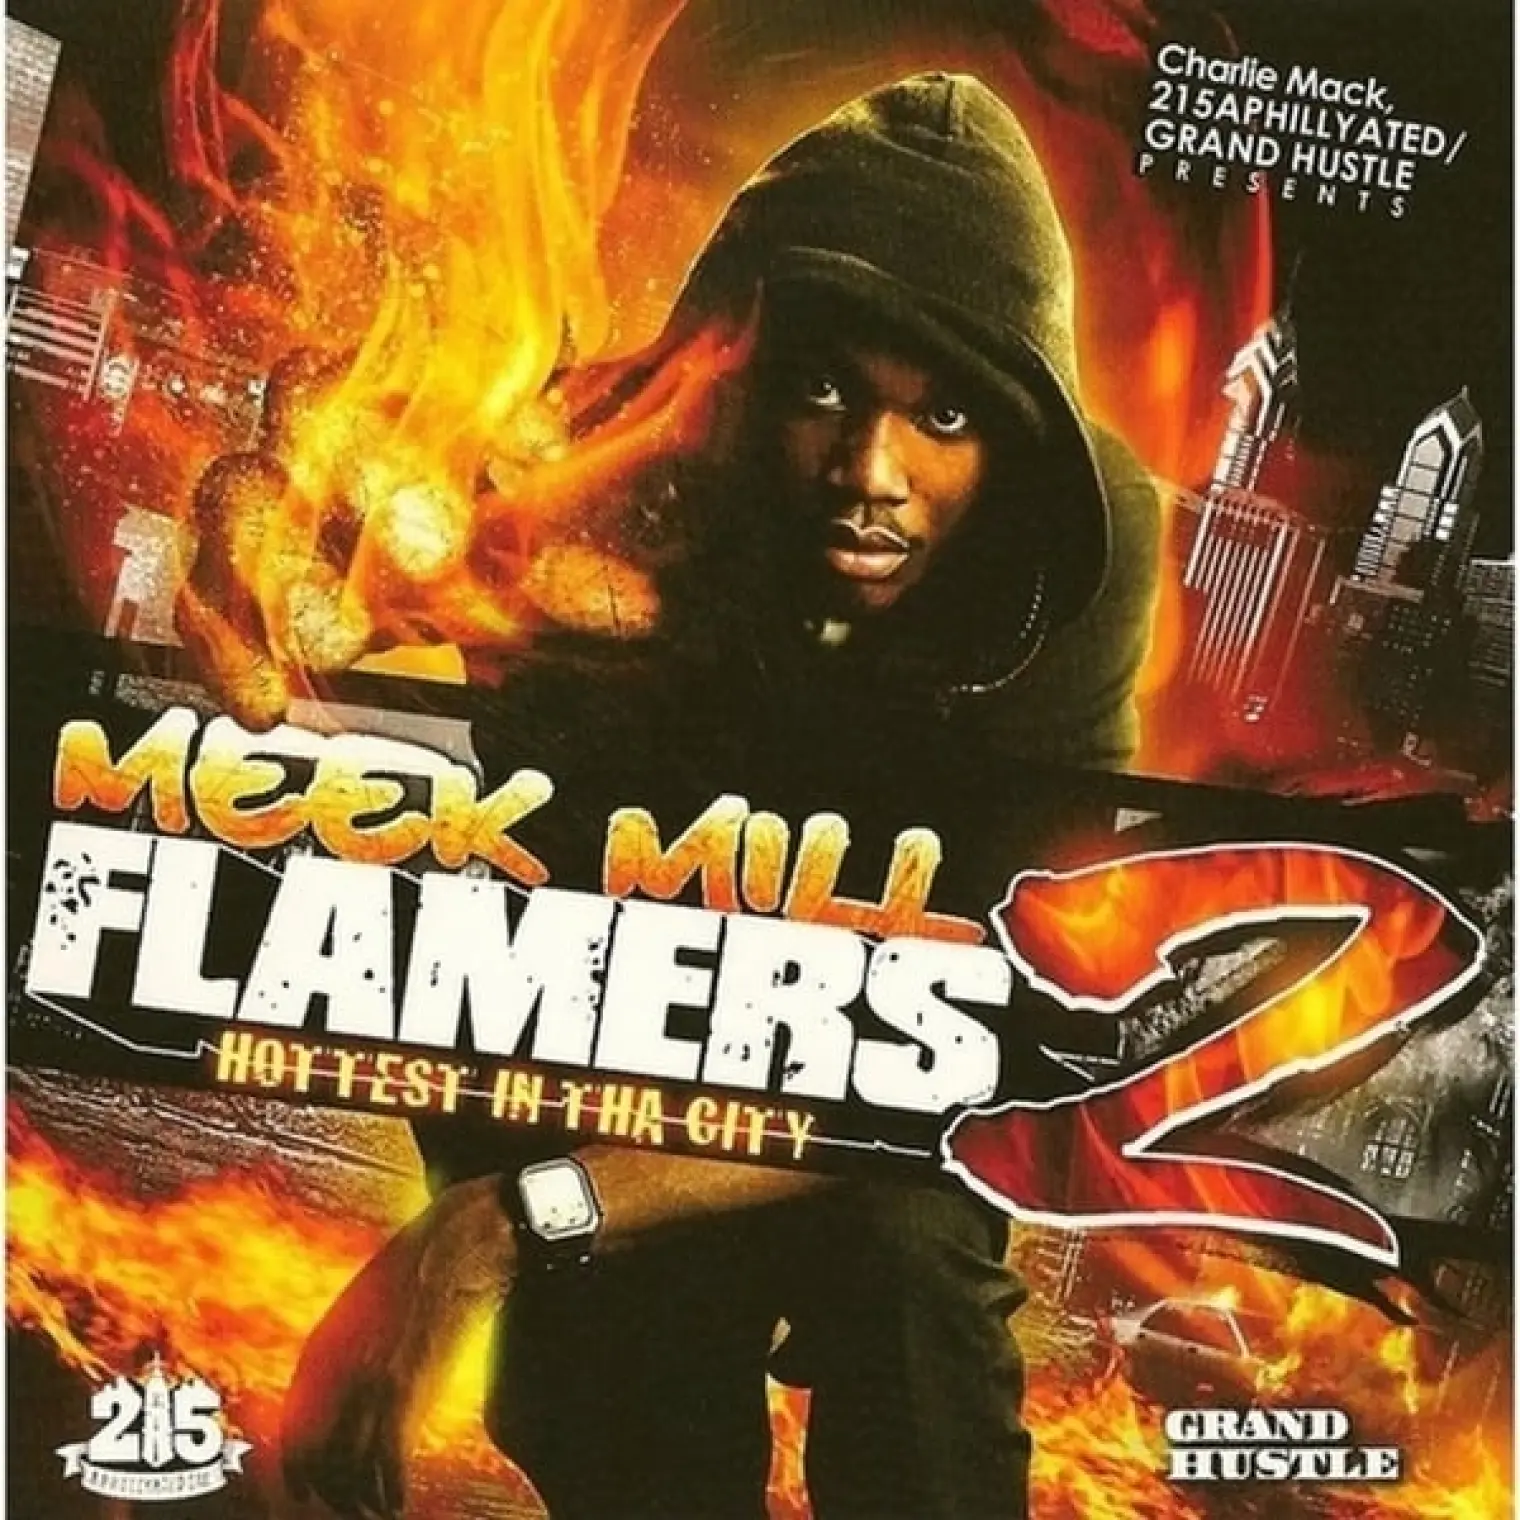 Flamers 2 (Hottest in Tha City) -  Meek Mill 